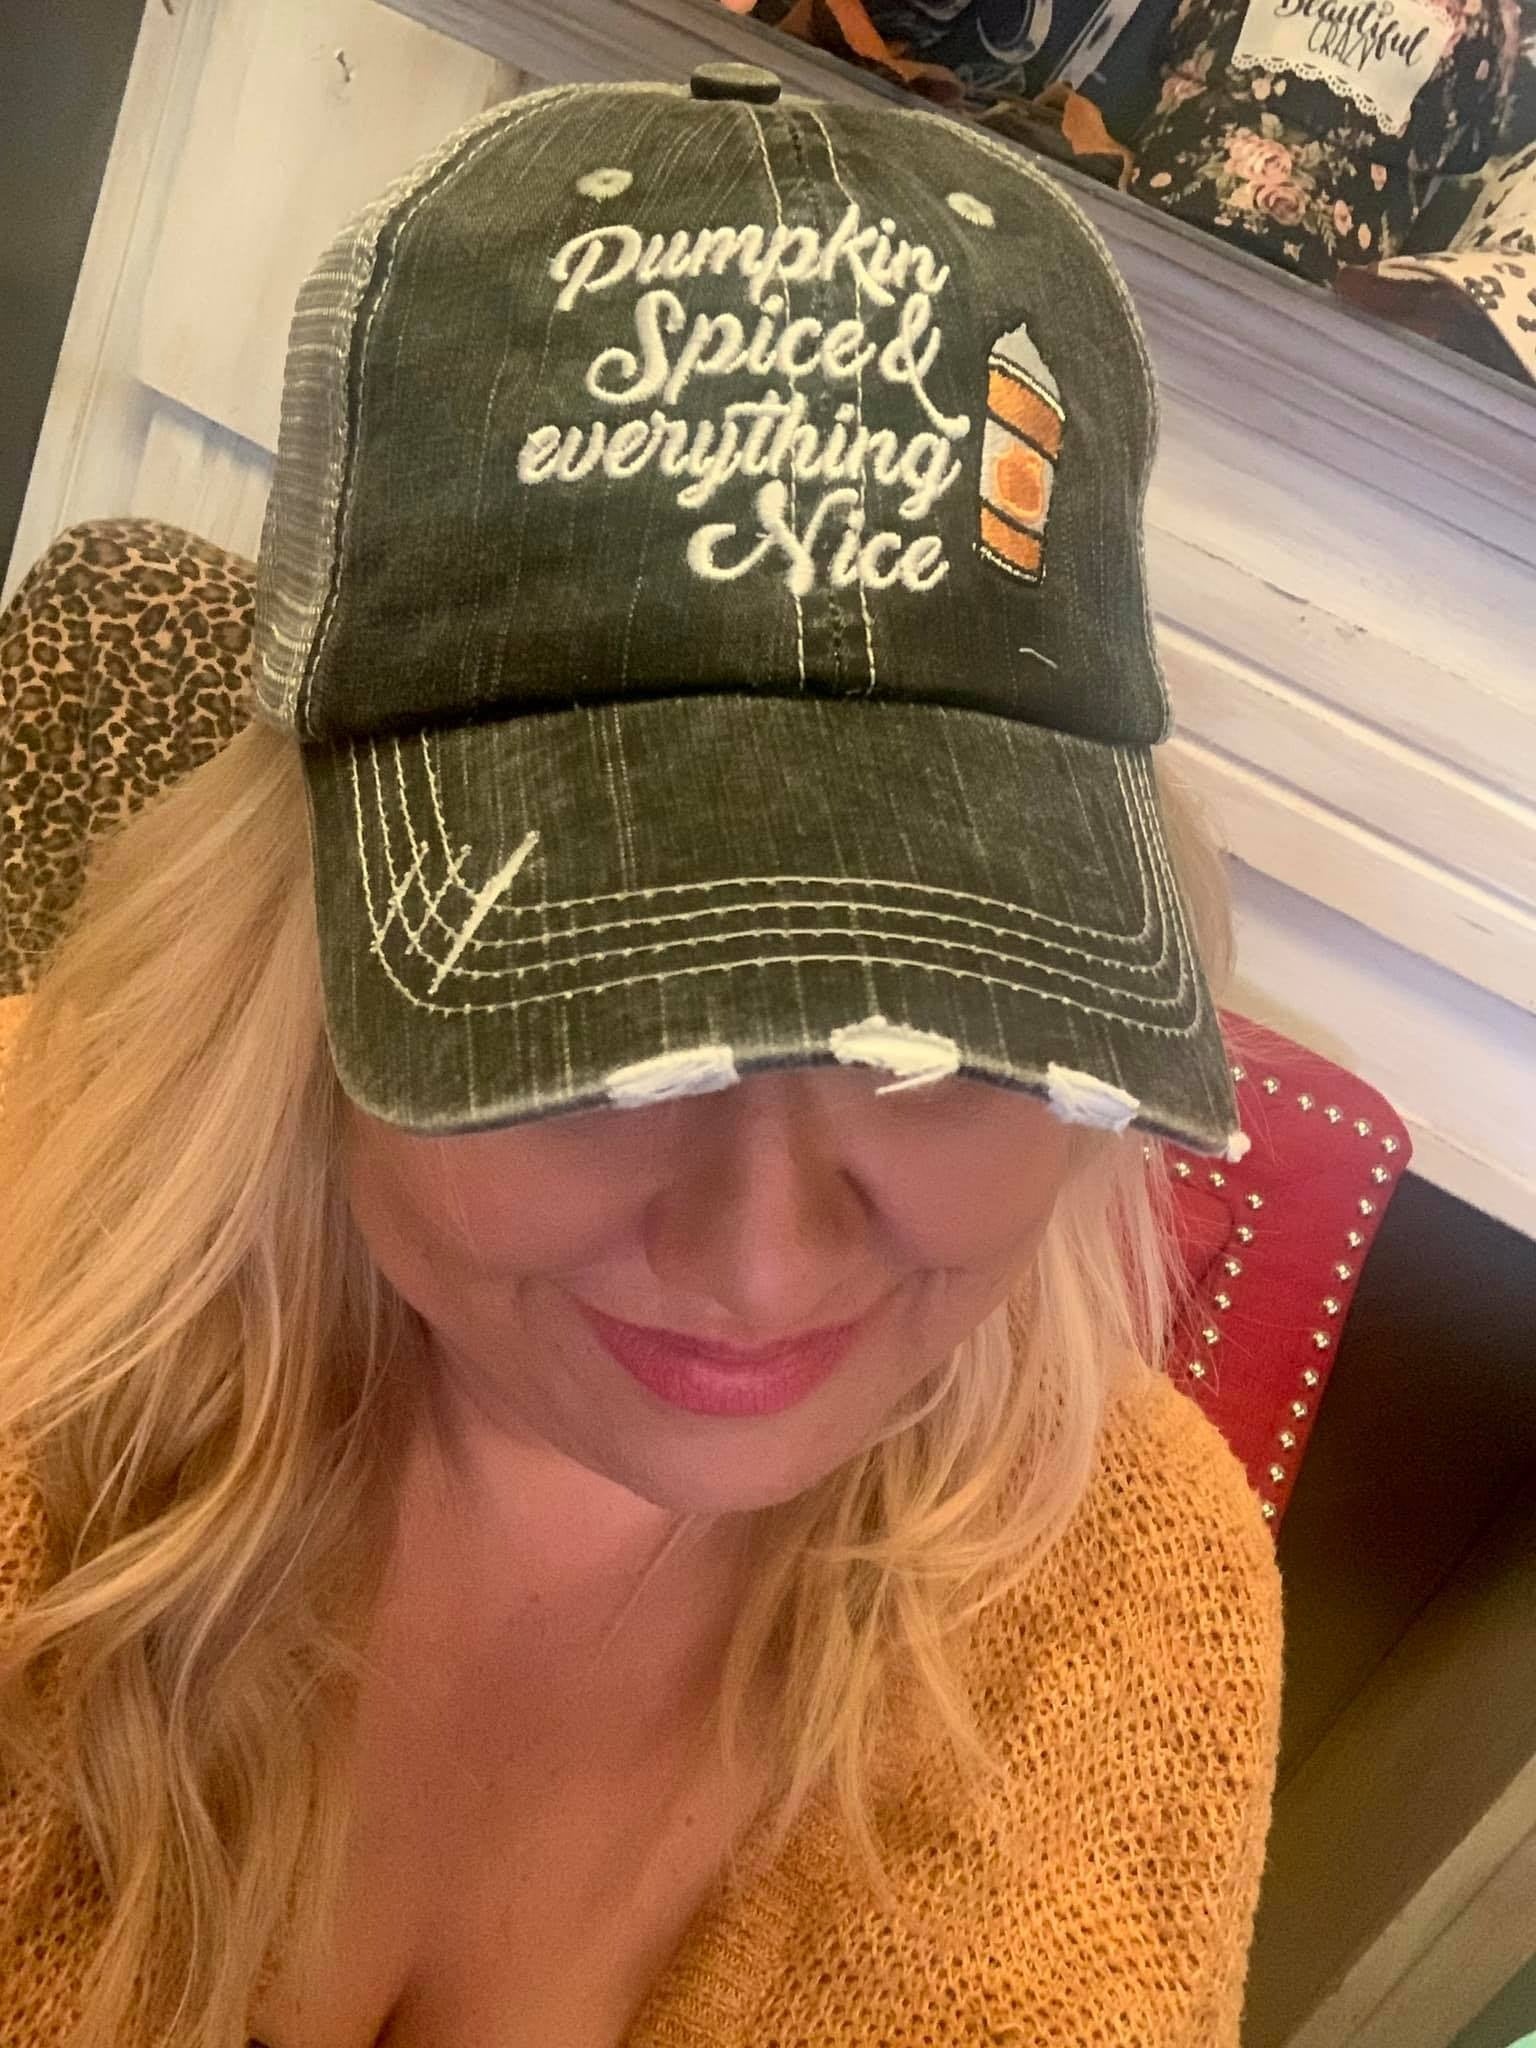 Pumpkin spice hats PUMPKIN SPICE and everything nice Chill Jesus 3 styles Embroidered trucker cap - Stacy's Pink Martini Boutique